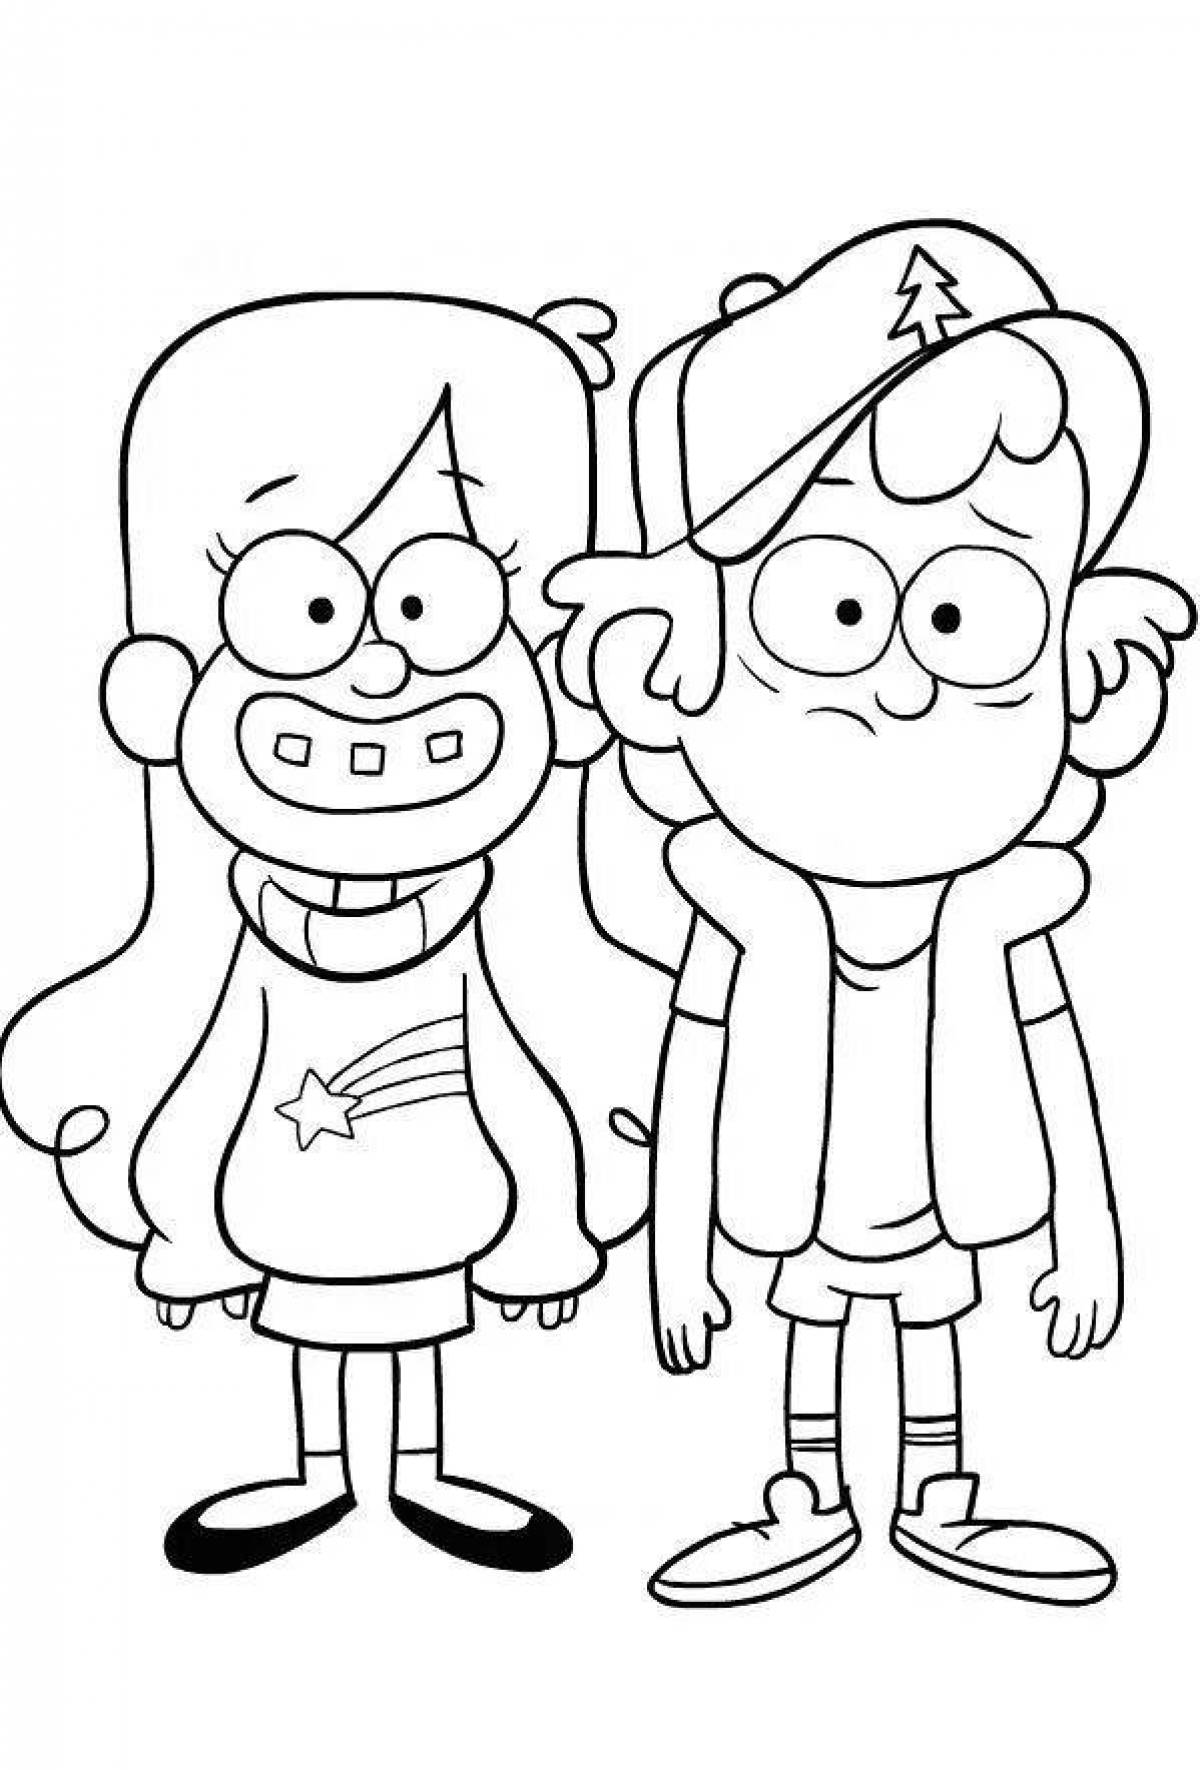 Glowing gravity falls coloring page